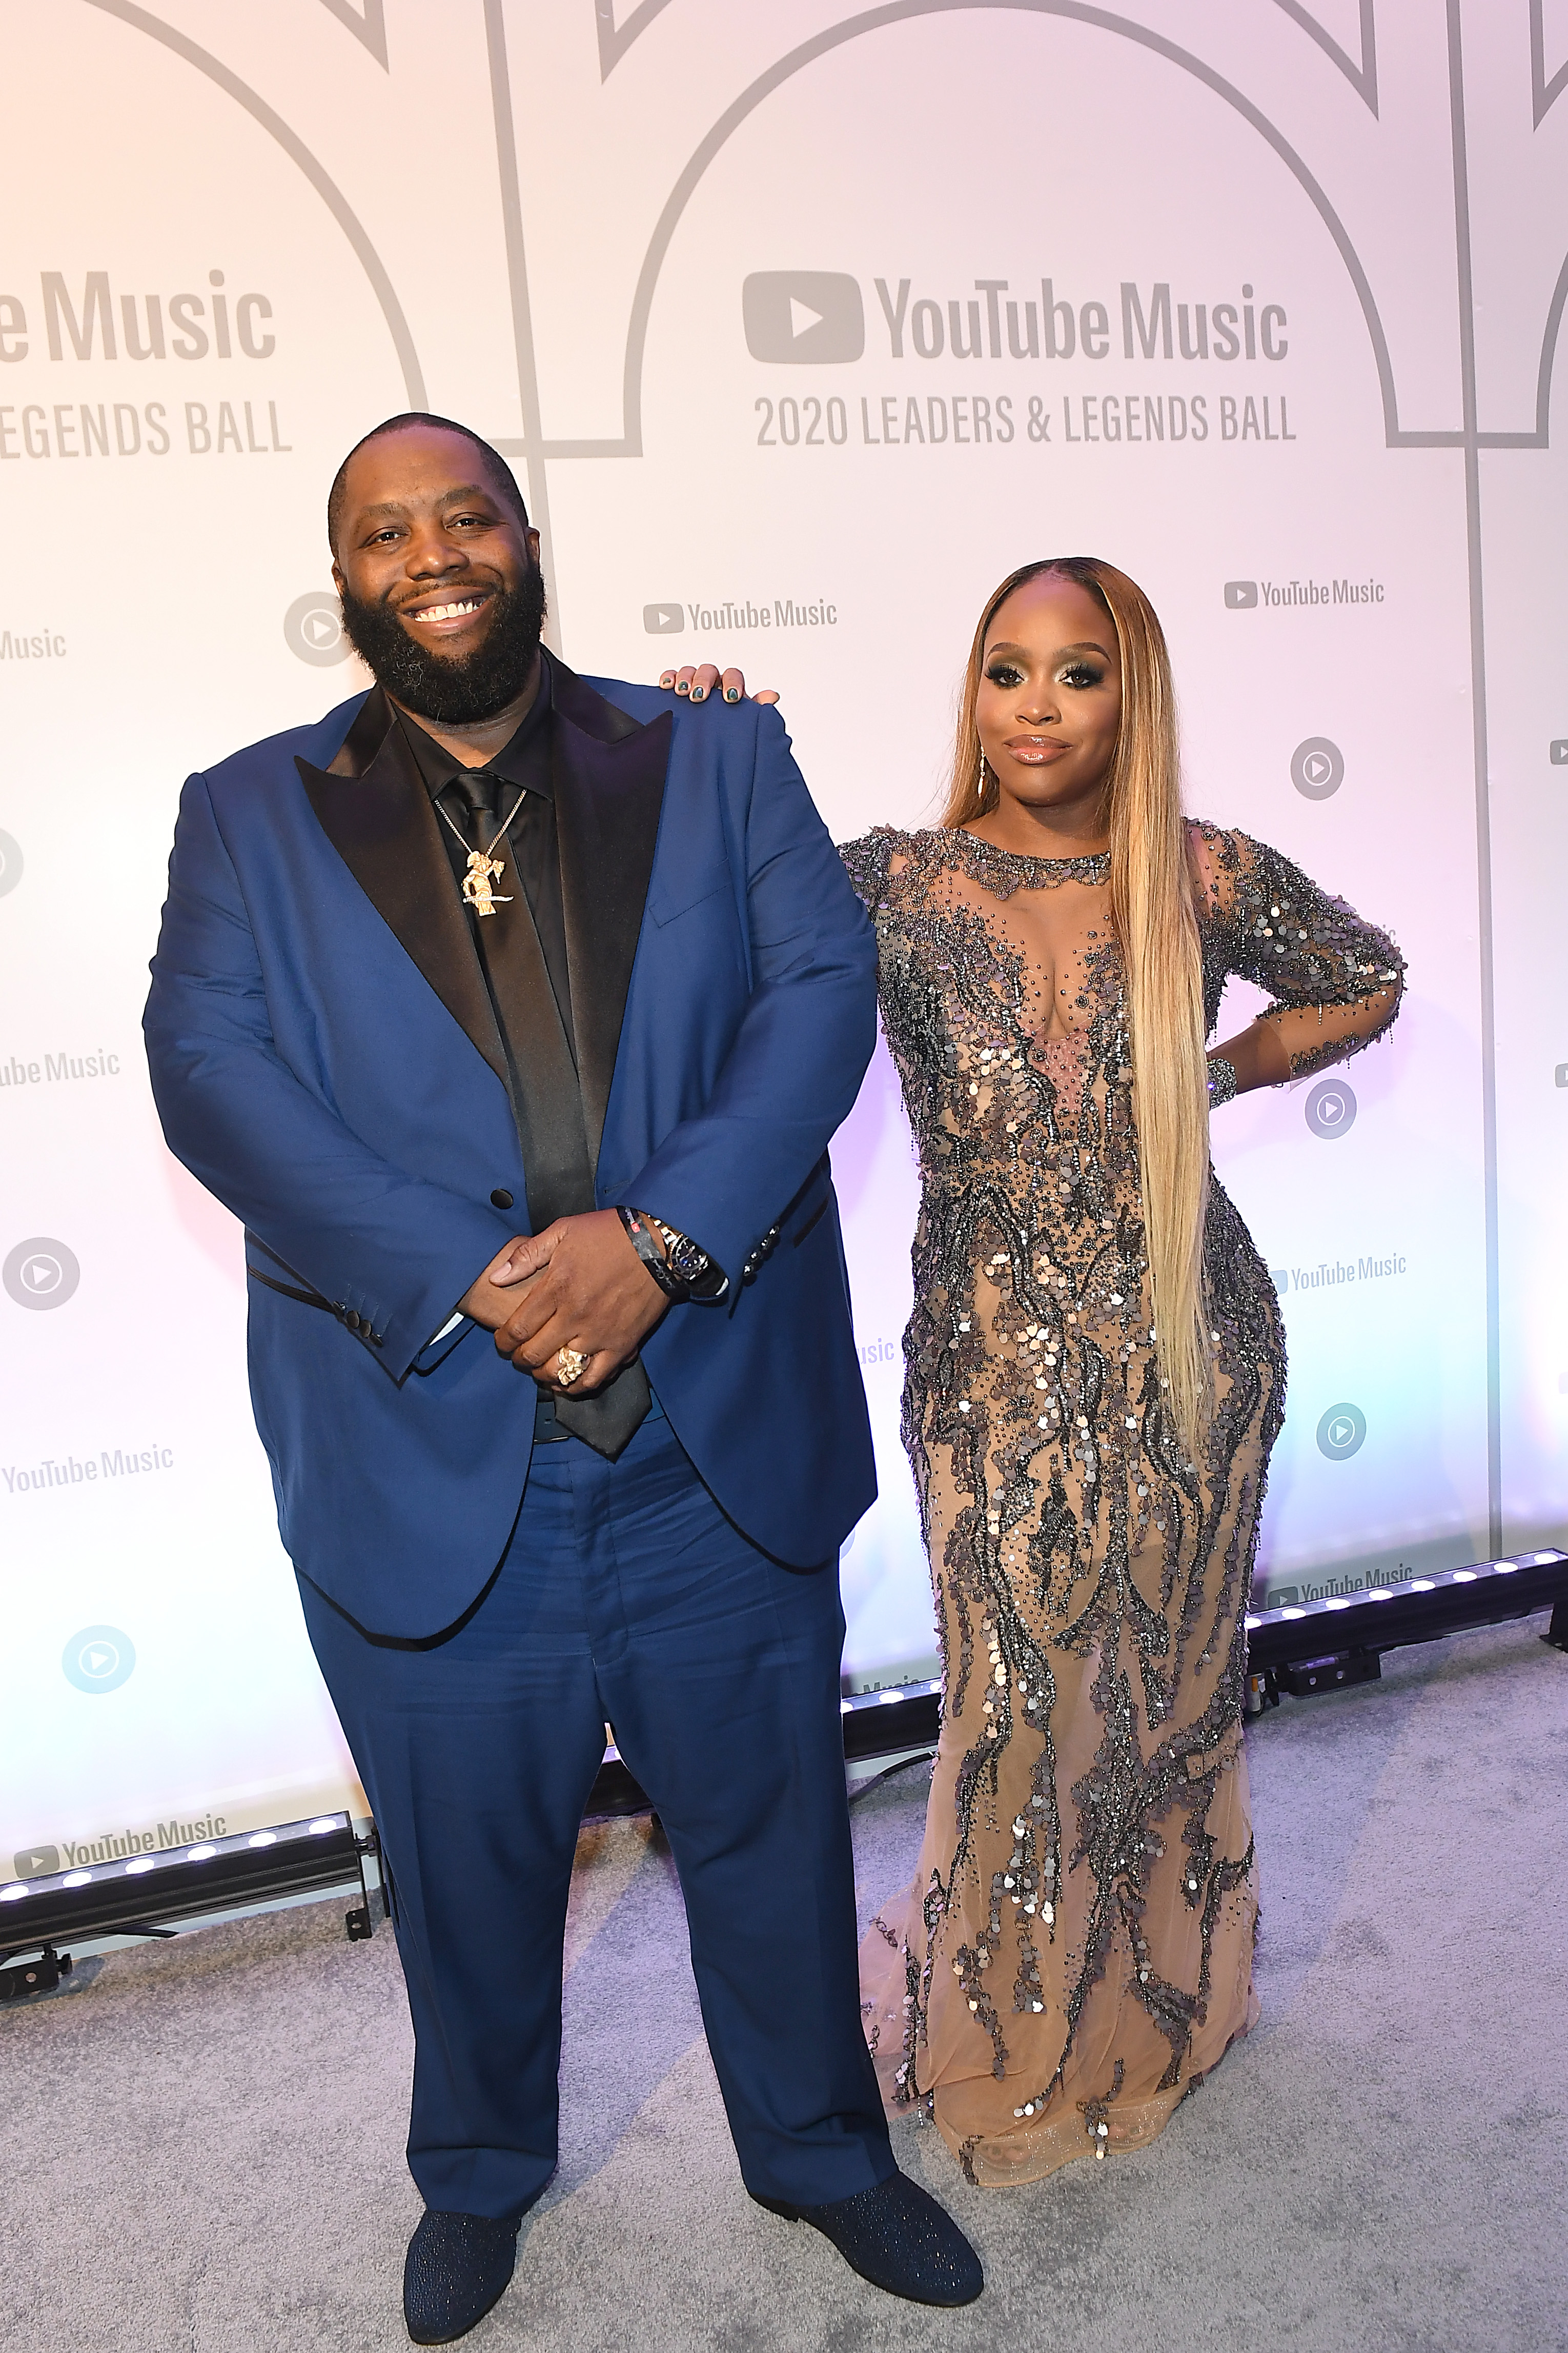 Killer Mike and Shana Render at a YouTube Music 2020 Leaders & Legends Ball at Atlanta History Center on January 15, 2020 in Atlanta, Georgia. | Source: Getty Images